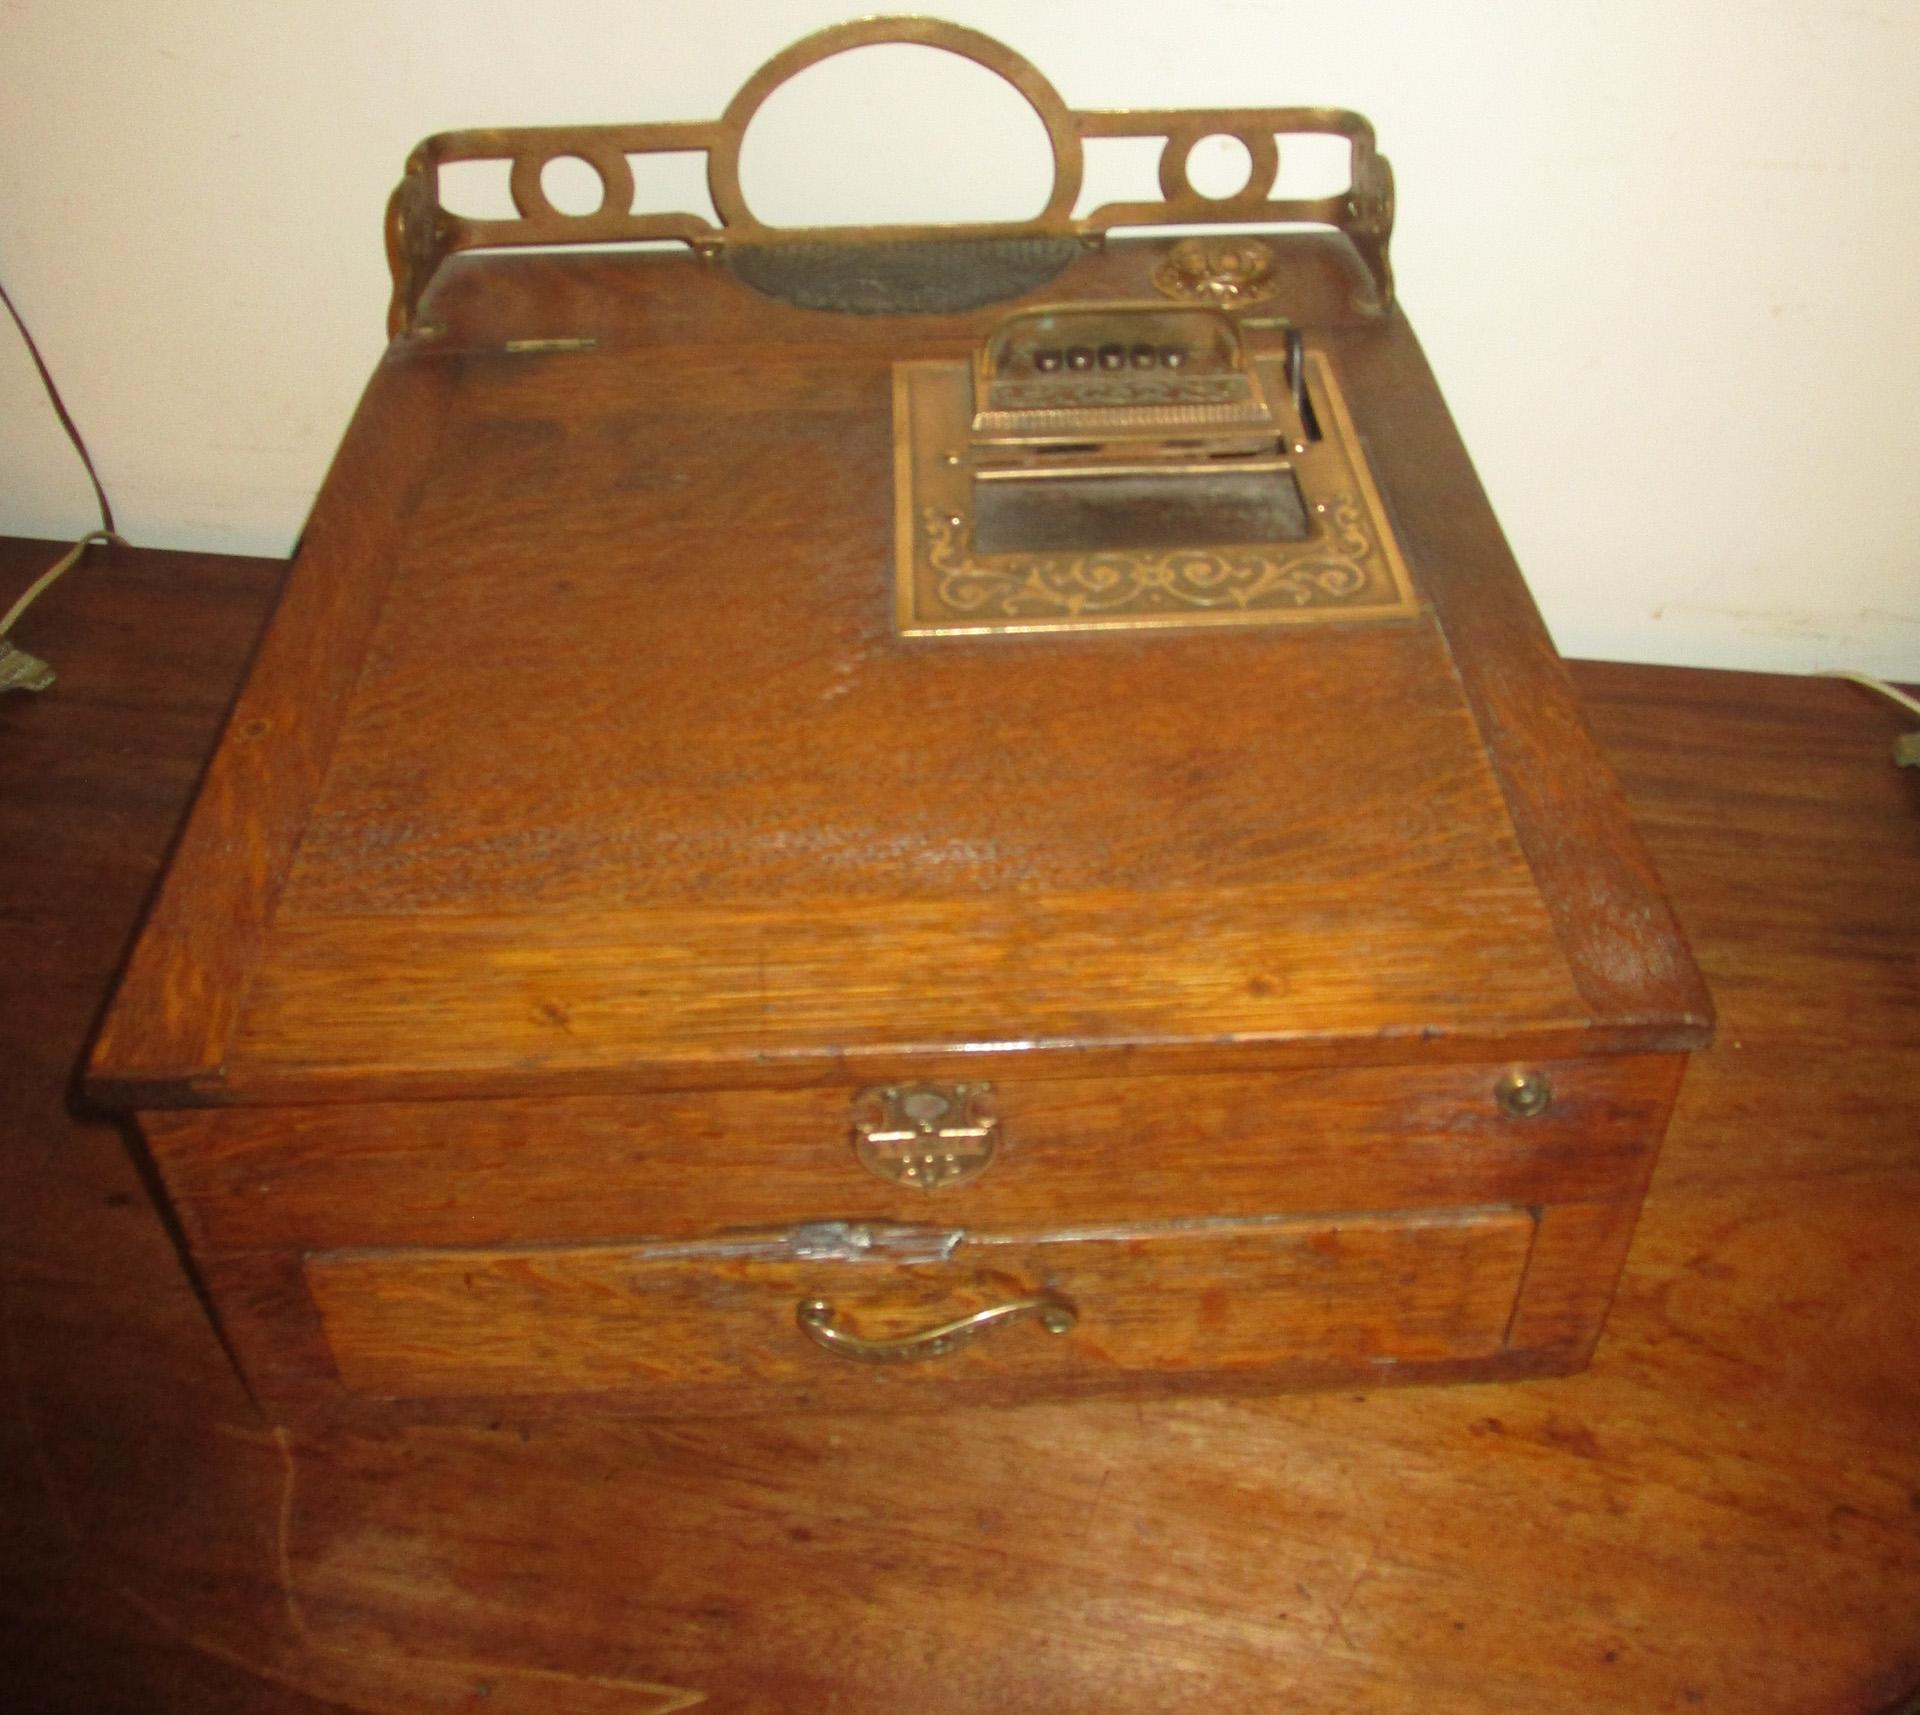 This unusual style late 19th century cash register money box was made by National Cash Register with a patent date of 1893, model number 202- 433821. Features include solid golden oak case with a covered brass inkwell, leather insert, brass gallery